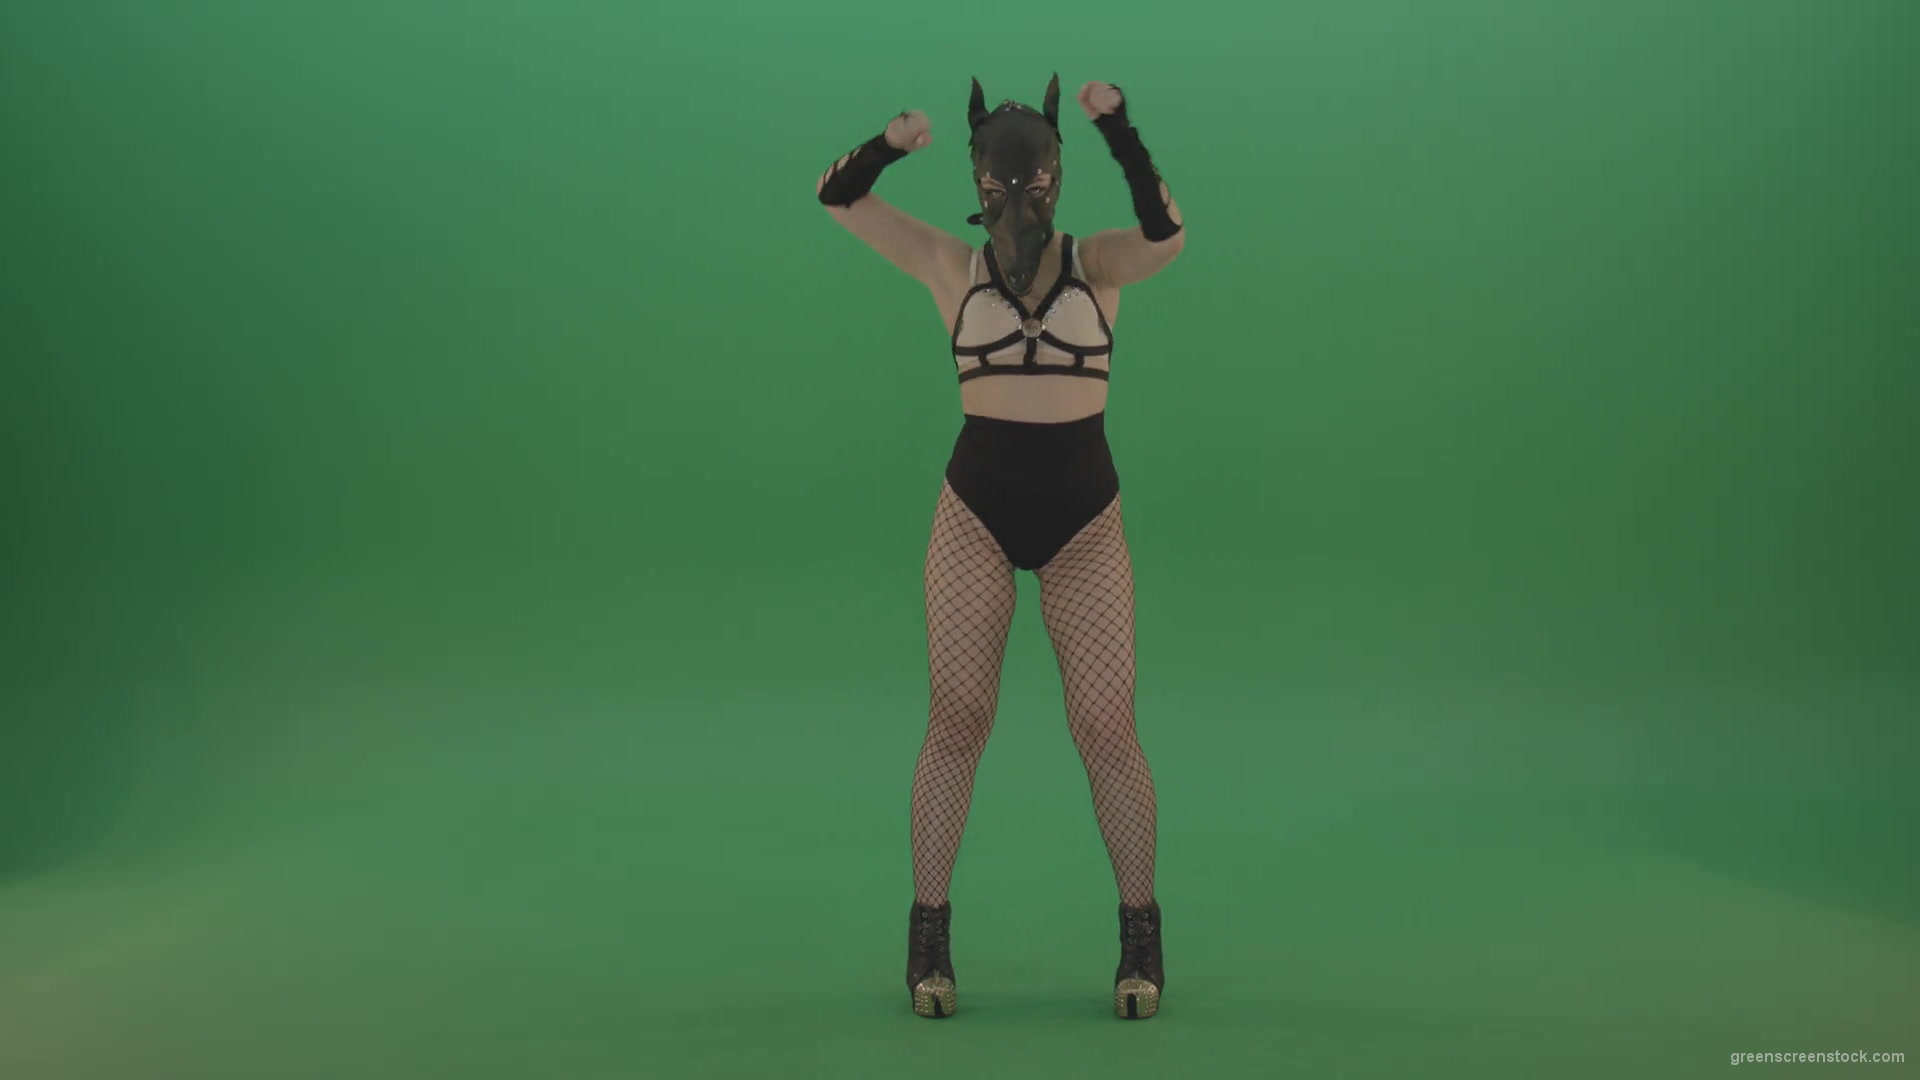 Girl-in-wolf-fetish-mask-sit-down-and-stand-up-making-hand-beat-on-green-screen-1920_002 Green Screen Stock